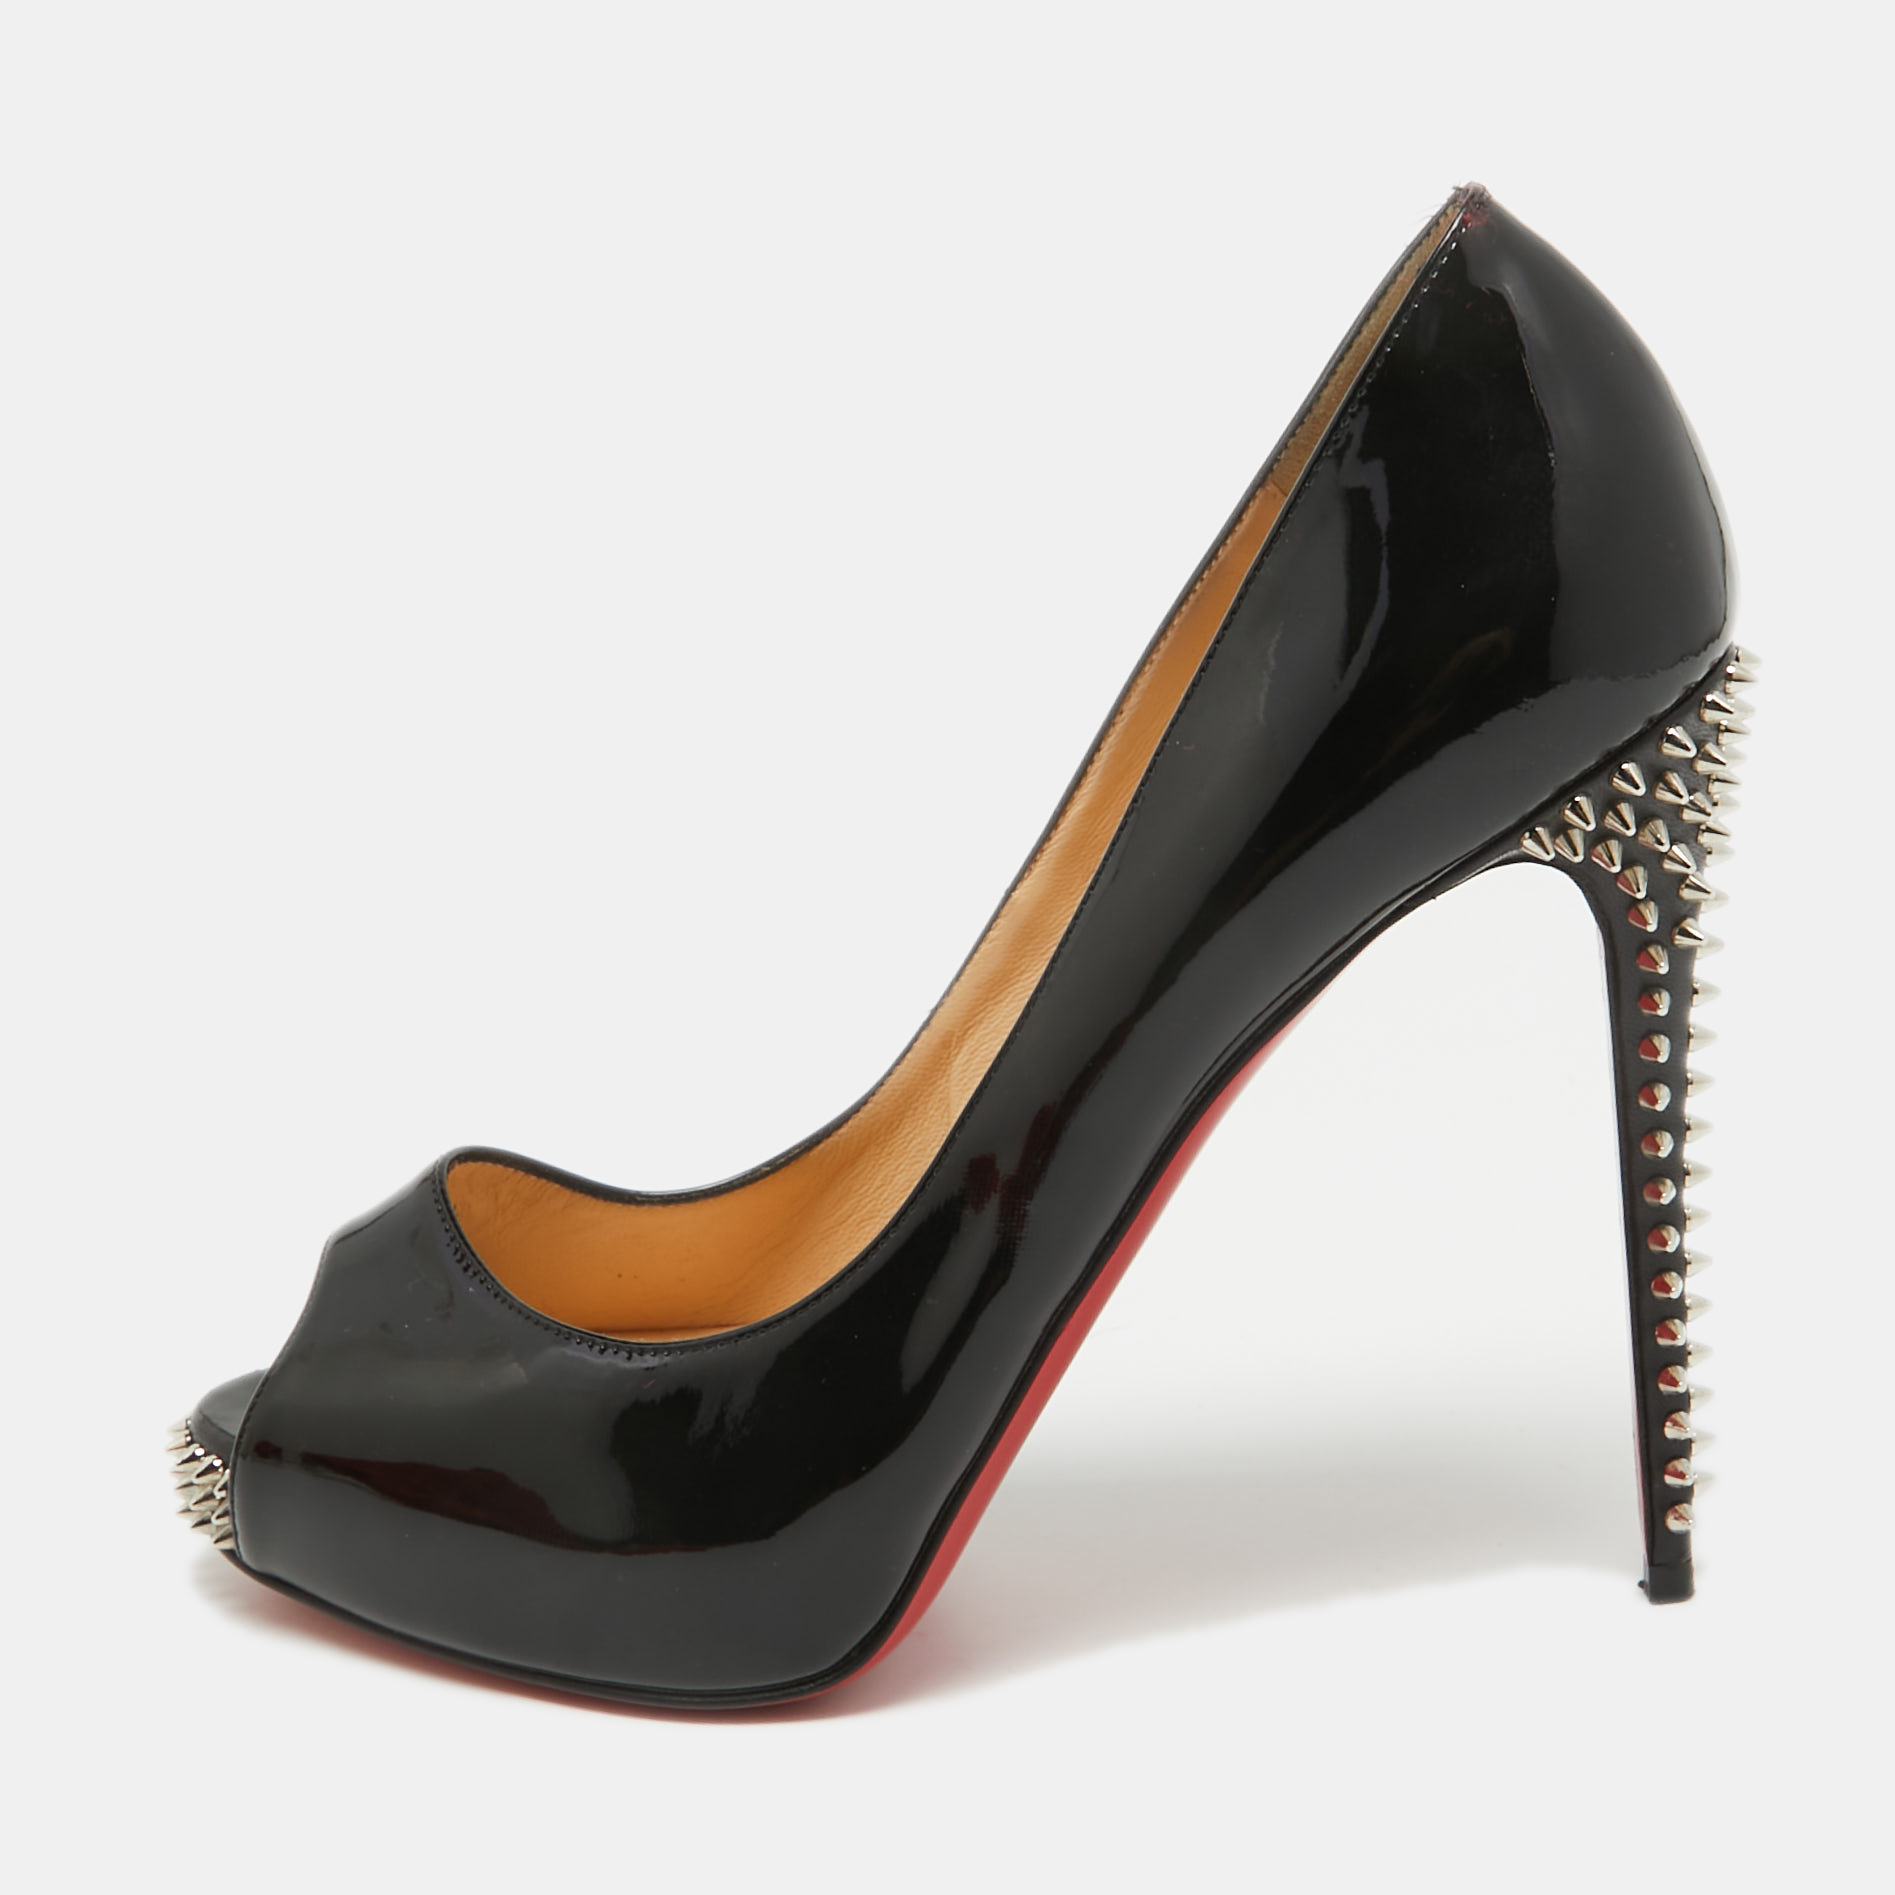 Pre-owned Christian Louboutin Black Patent Leather Spikes Peep Toe Platform Pumps Size 38.5